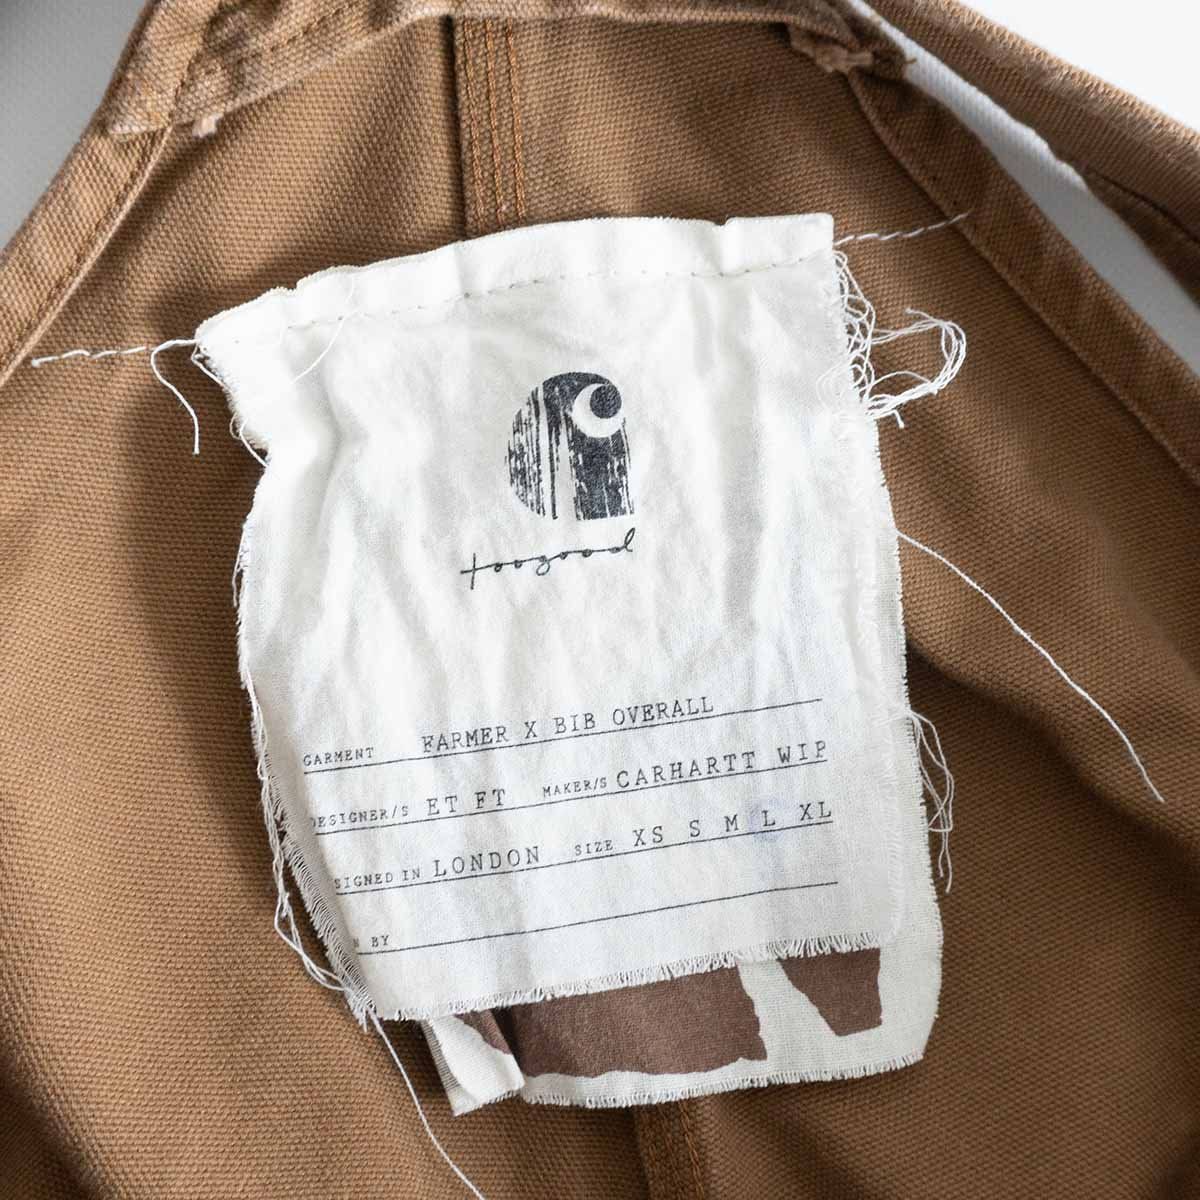 Is Carhartt Made in the USA?